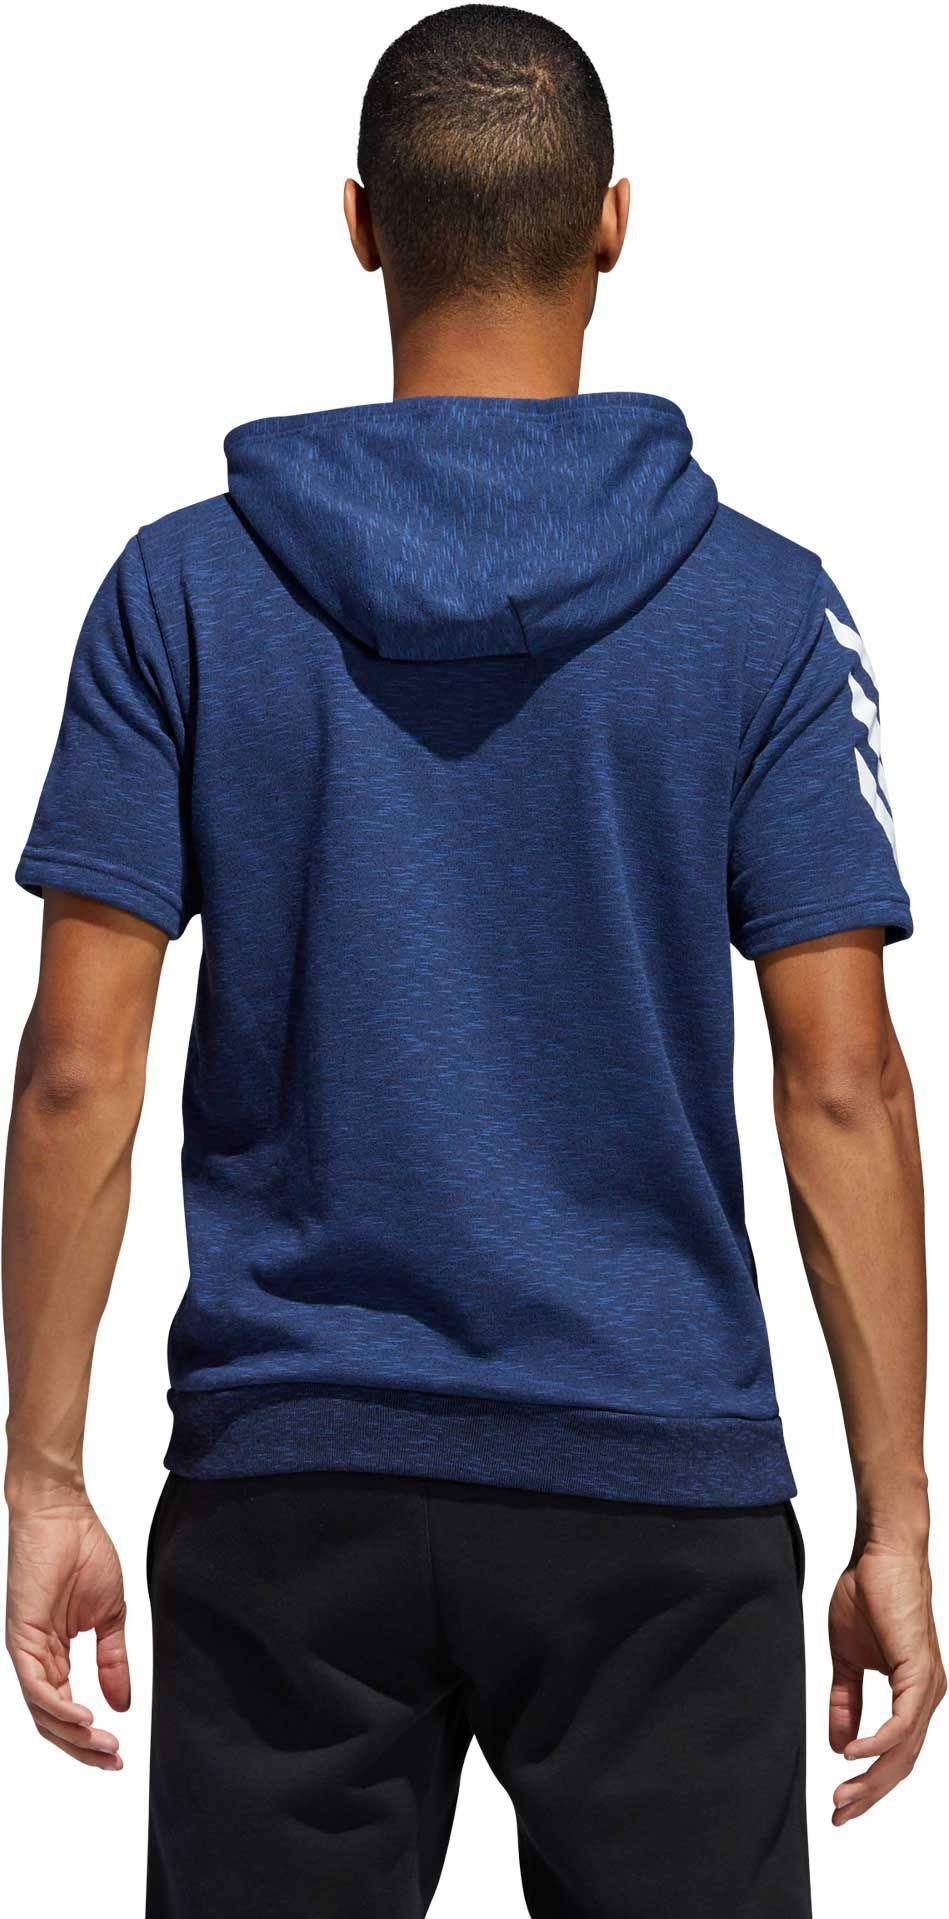 adidas Cotton Pickup Shooter Short Sleeve Hoodie in Blue for Men - Lyst